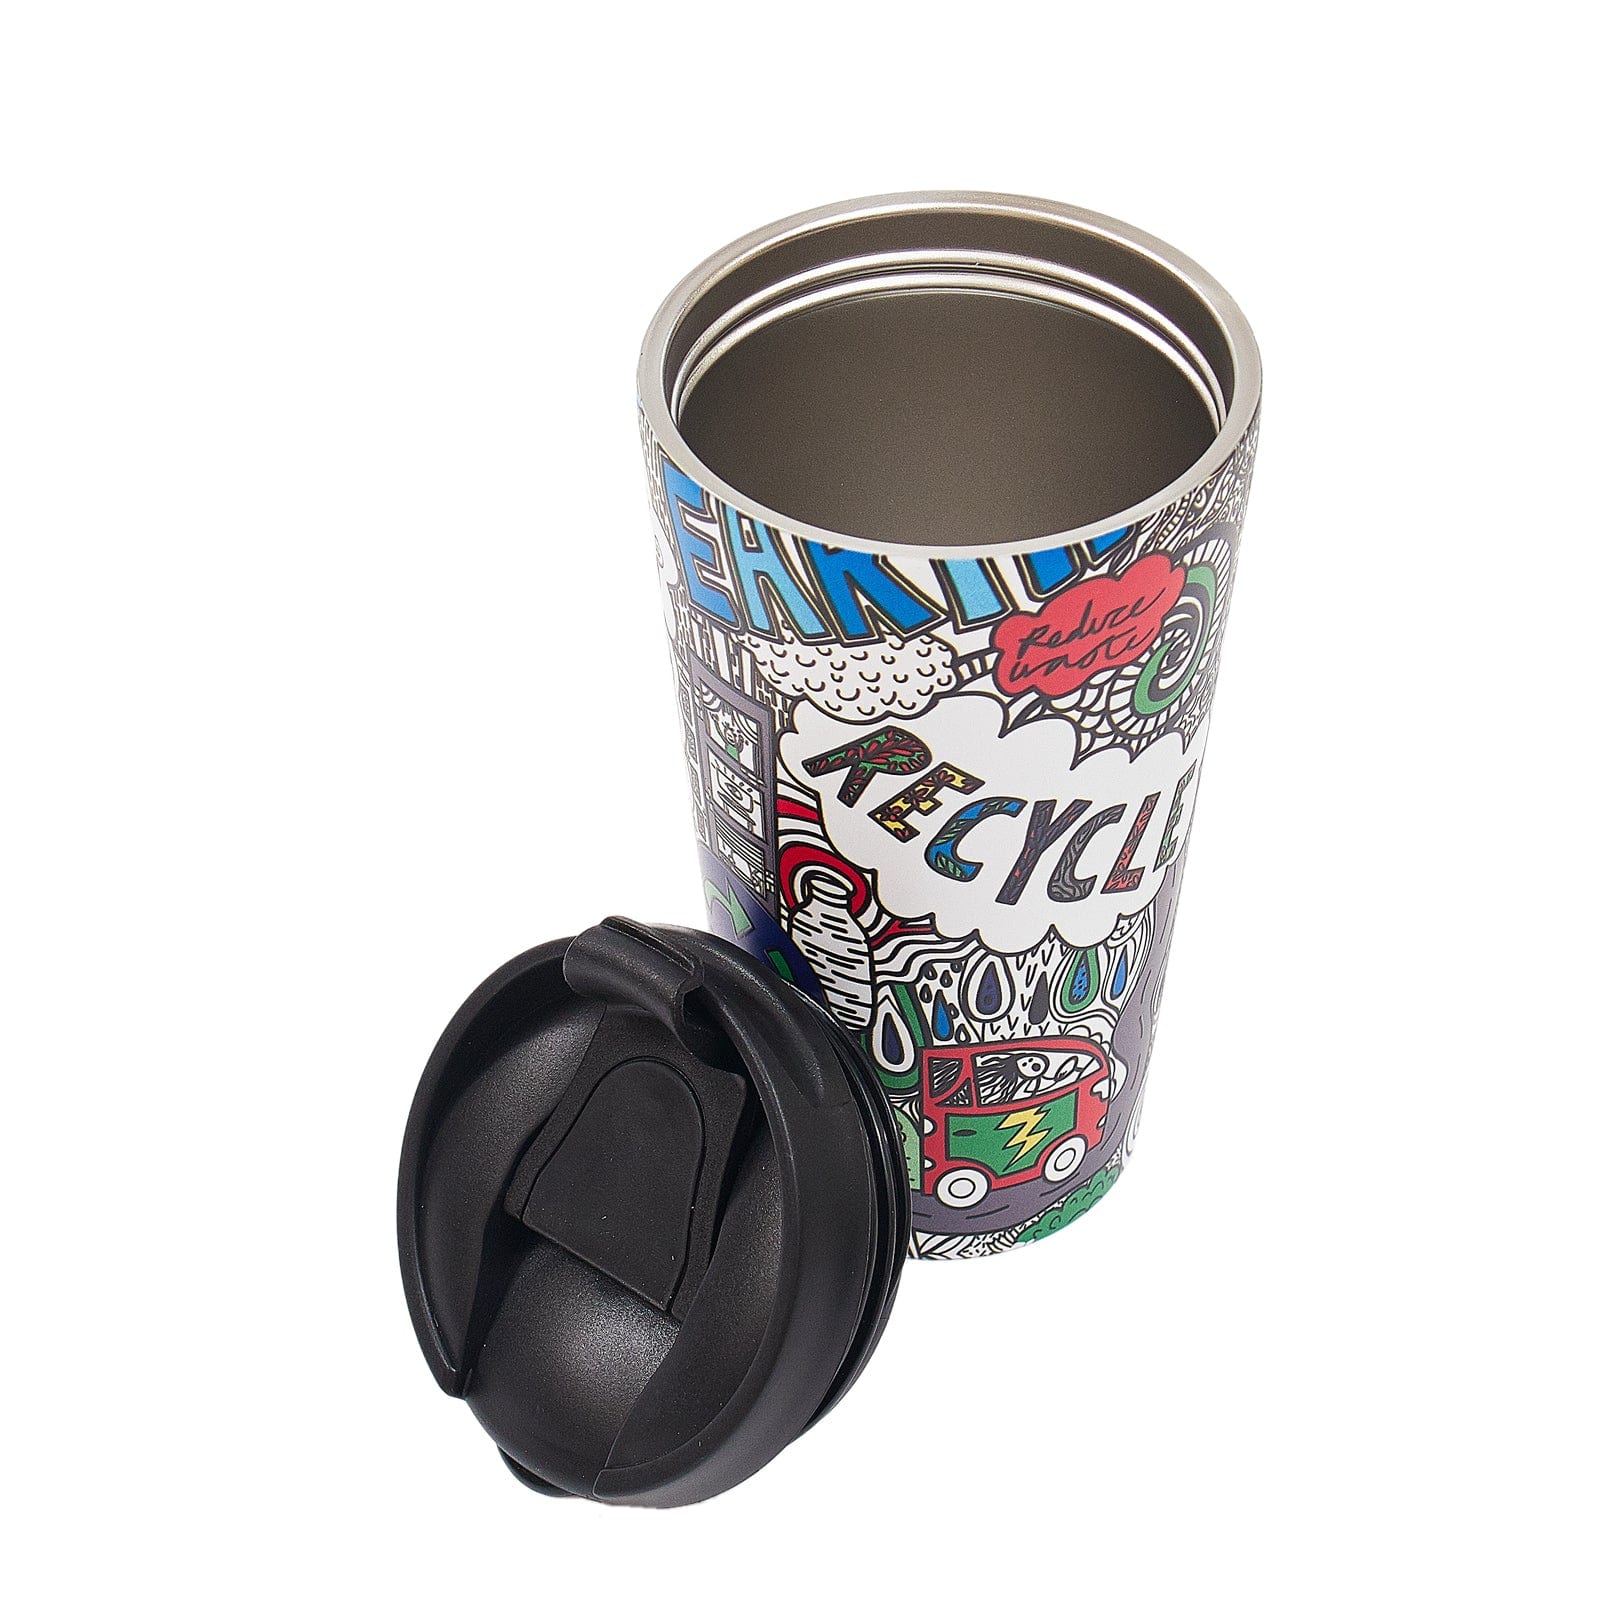 Eco Chic Eco Chic Thermal Coffee Cup Save the Planet